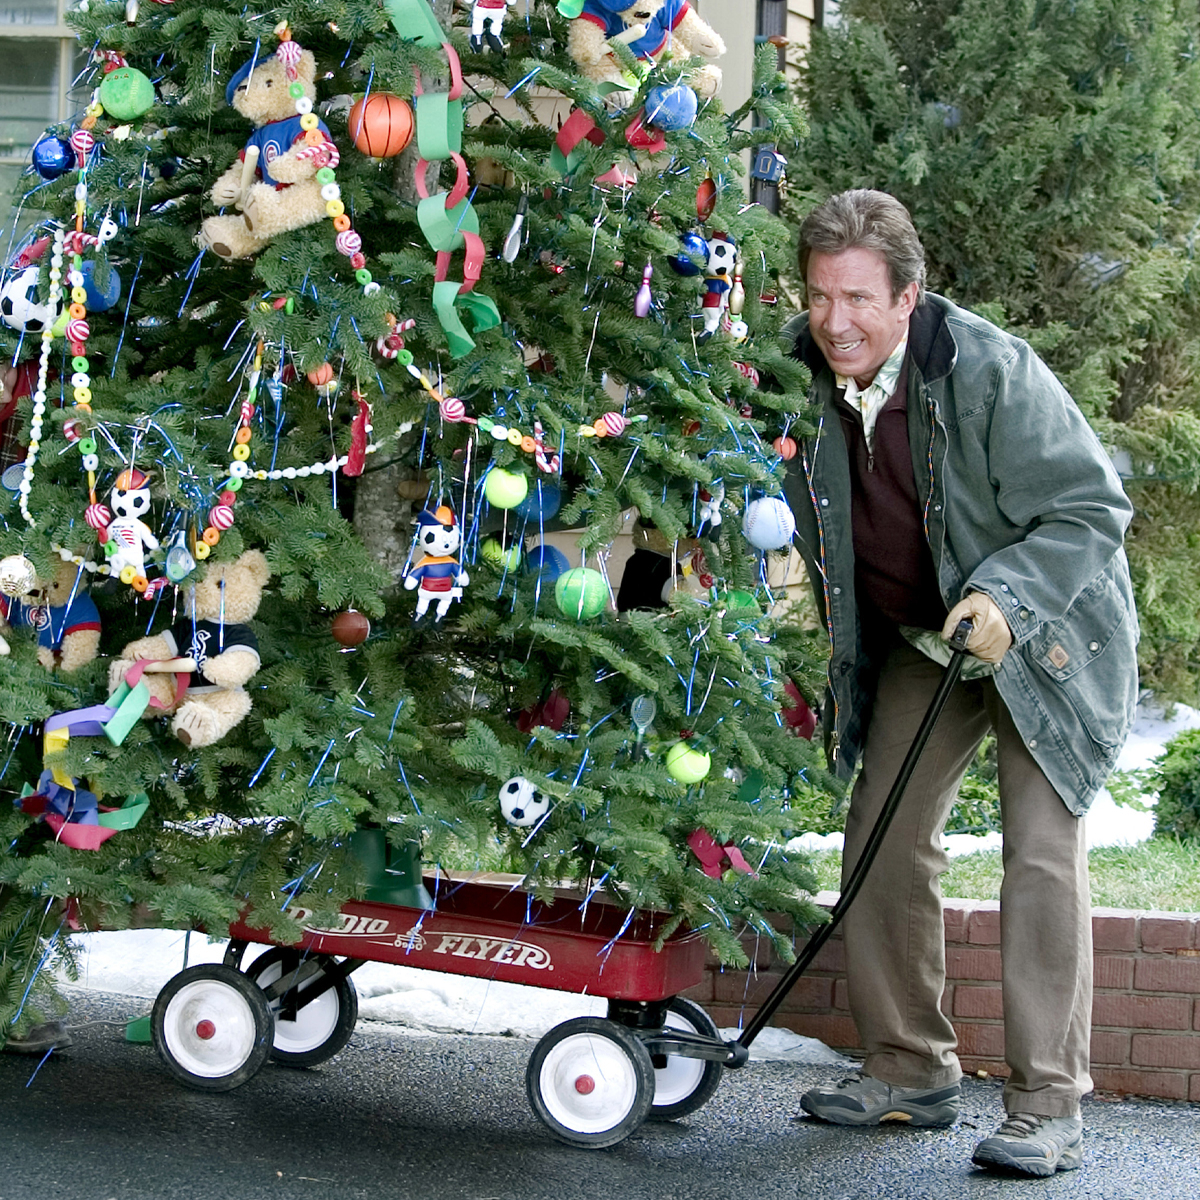 https://akns-images.eonline.com/eol_images/Entire_Site/20211120/rs_1200x1200-211220035348-1200-Tim-Allen-Christmas-with-the-Kranks-122021.jpg?fit=around%7C1080:1080&output-quality=90&crop=1080:1080;center,top